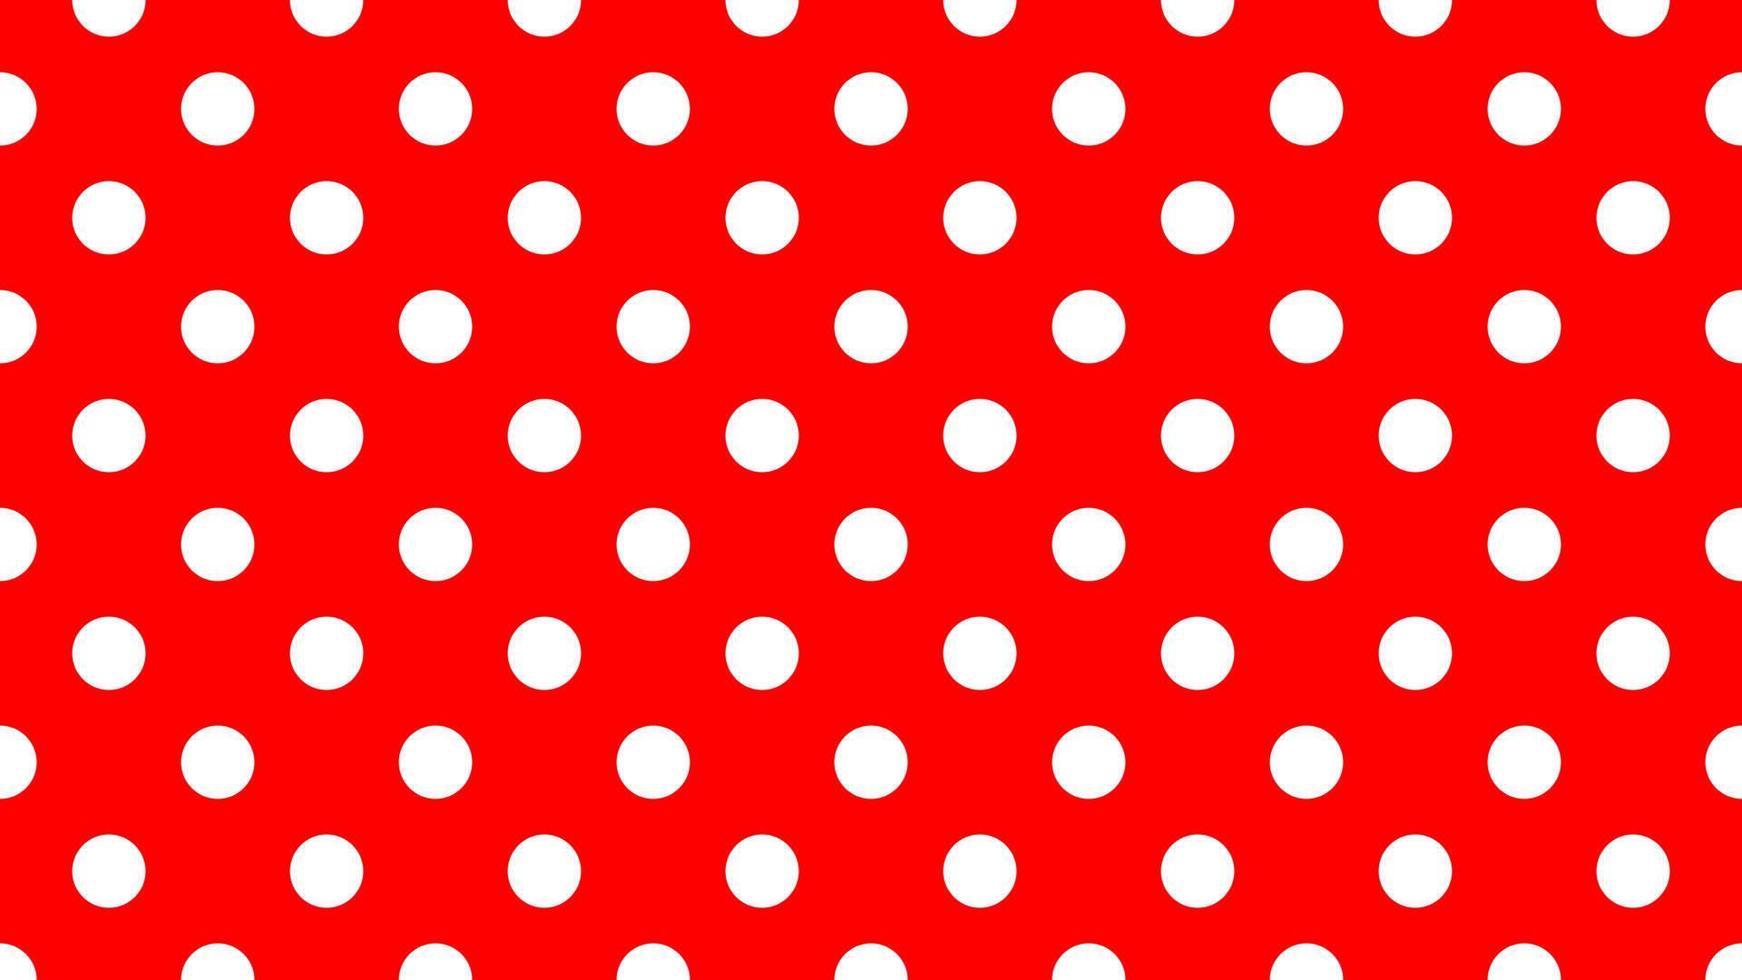 white color polka dots over red background vector